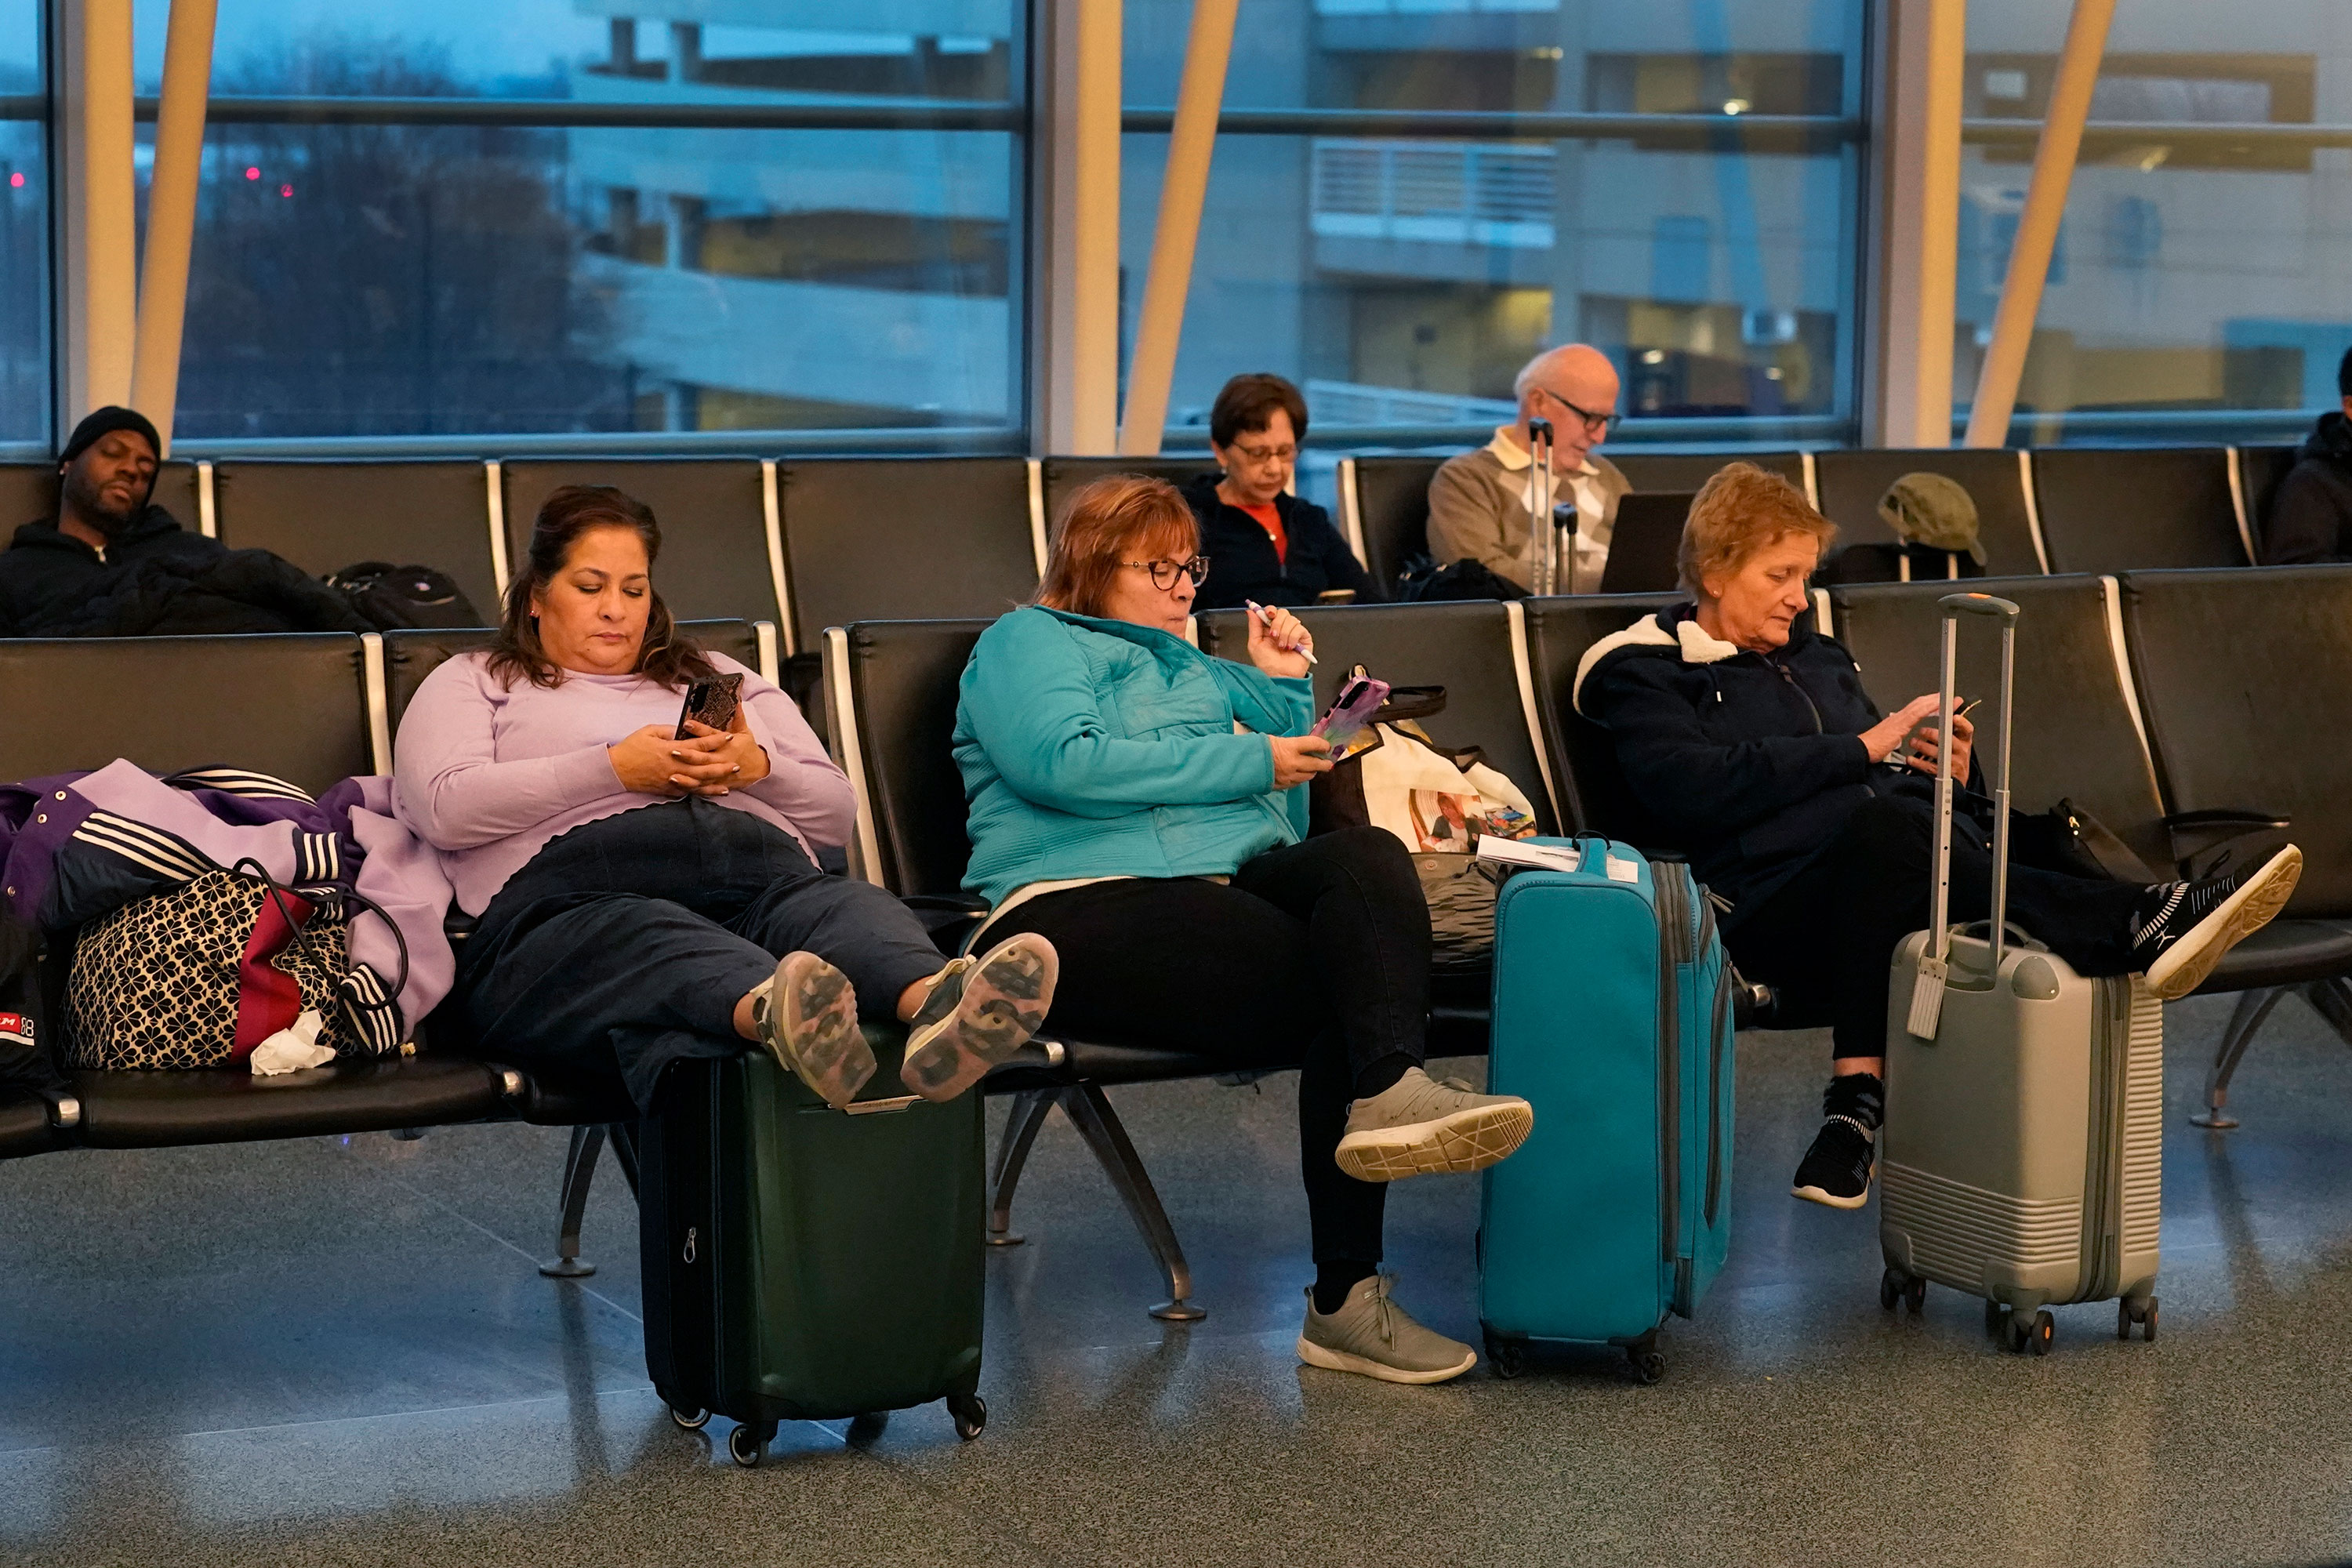 Passengers wait at Chicago's Midway Airport on Wednesday.